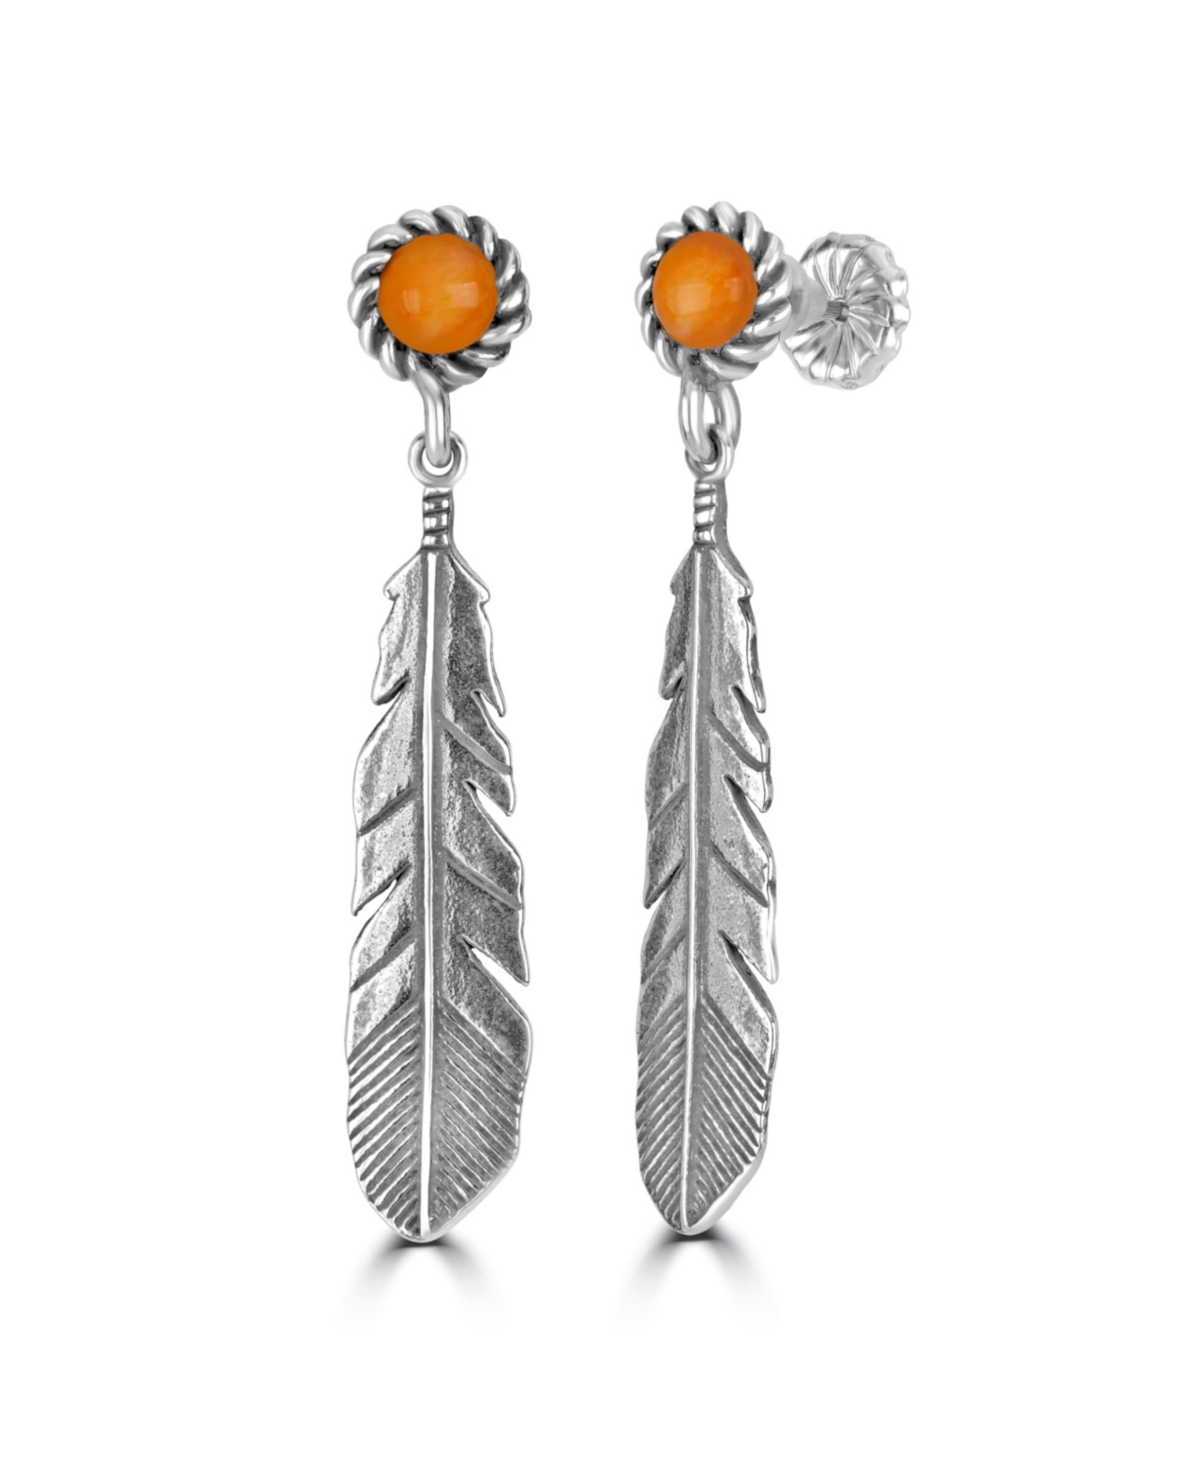 Sterling Silver Feather and Genuine Gemstone Dangle Earrings - Orange spiny oyster